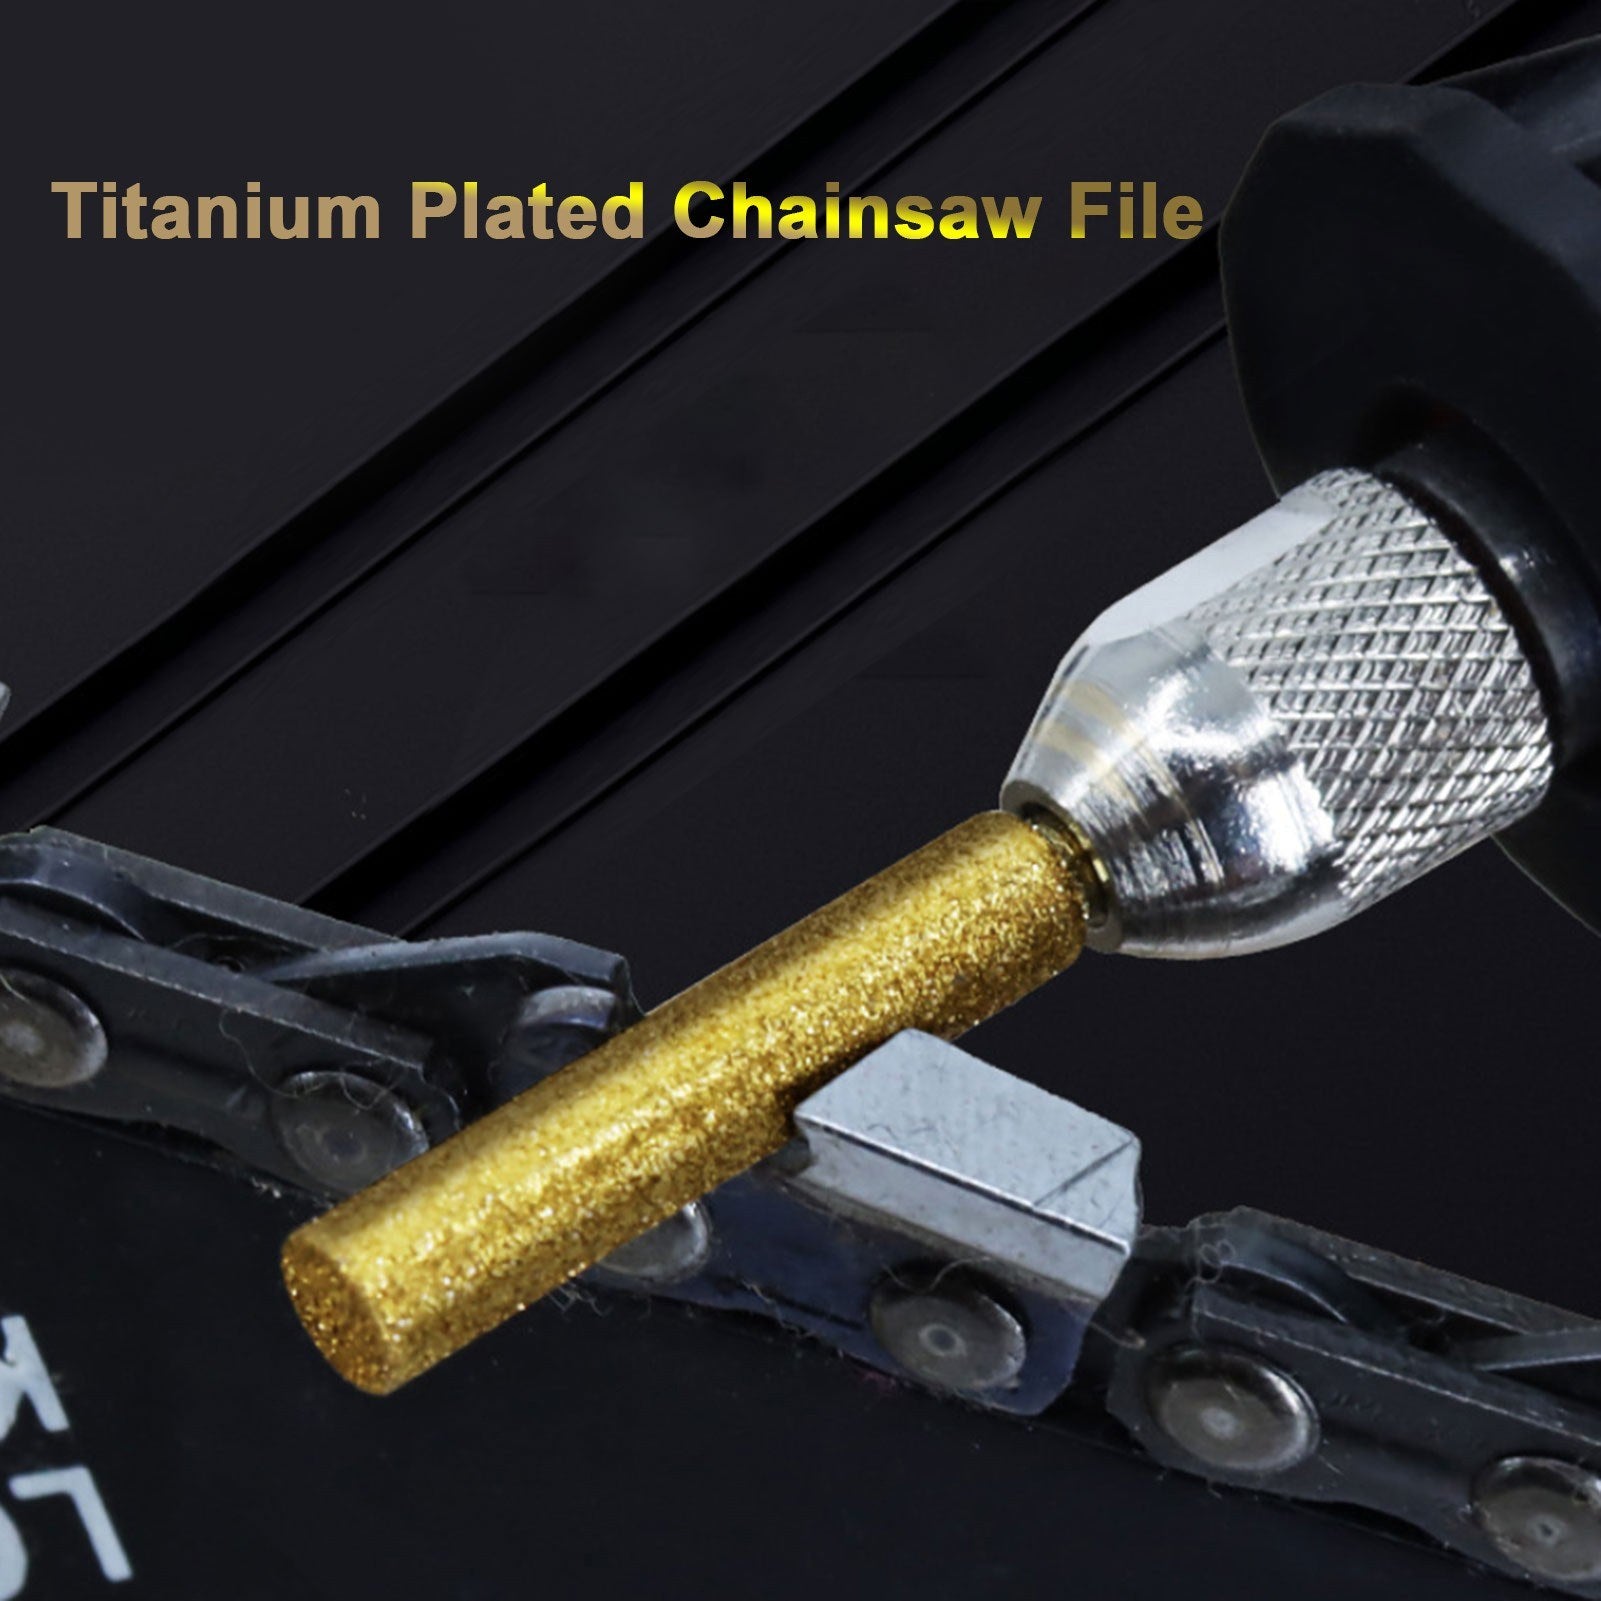 8Pcs Titanium Plated Diamond Bits High Hardness Chainsaw Files for Electric Chainsaw Sharpener - 4mm